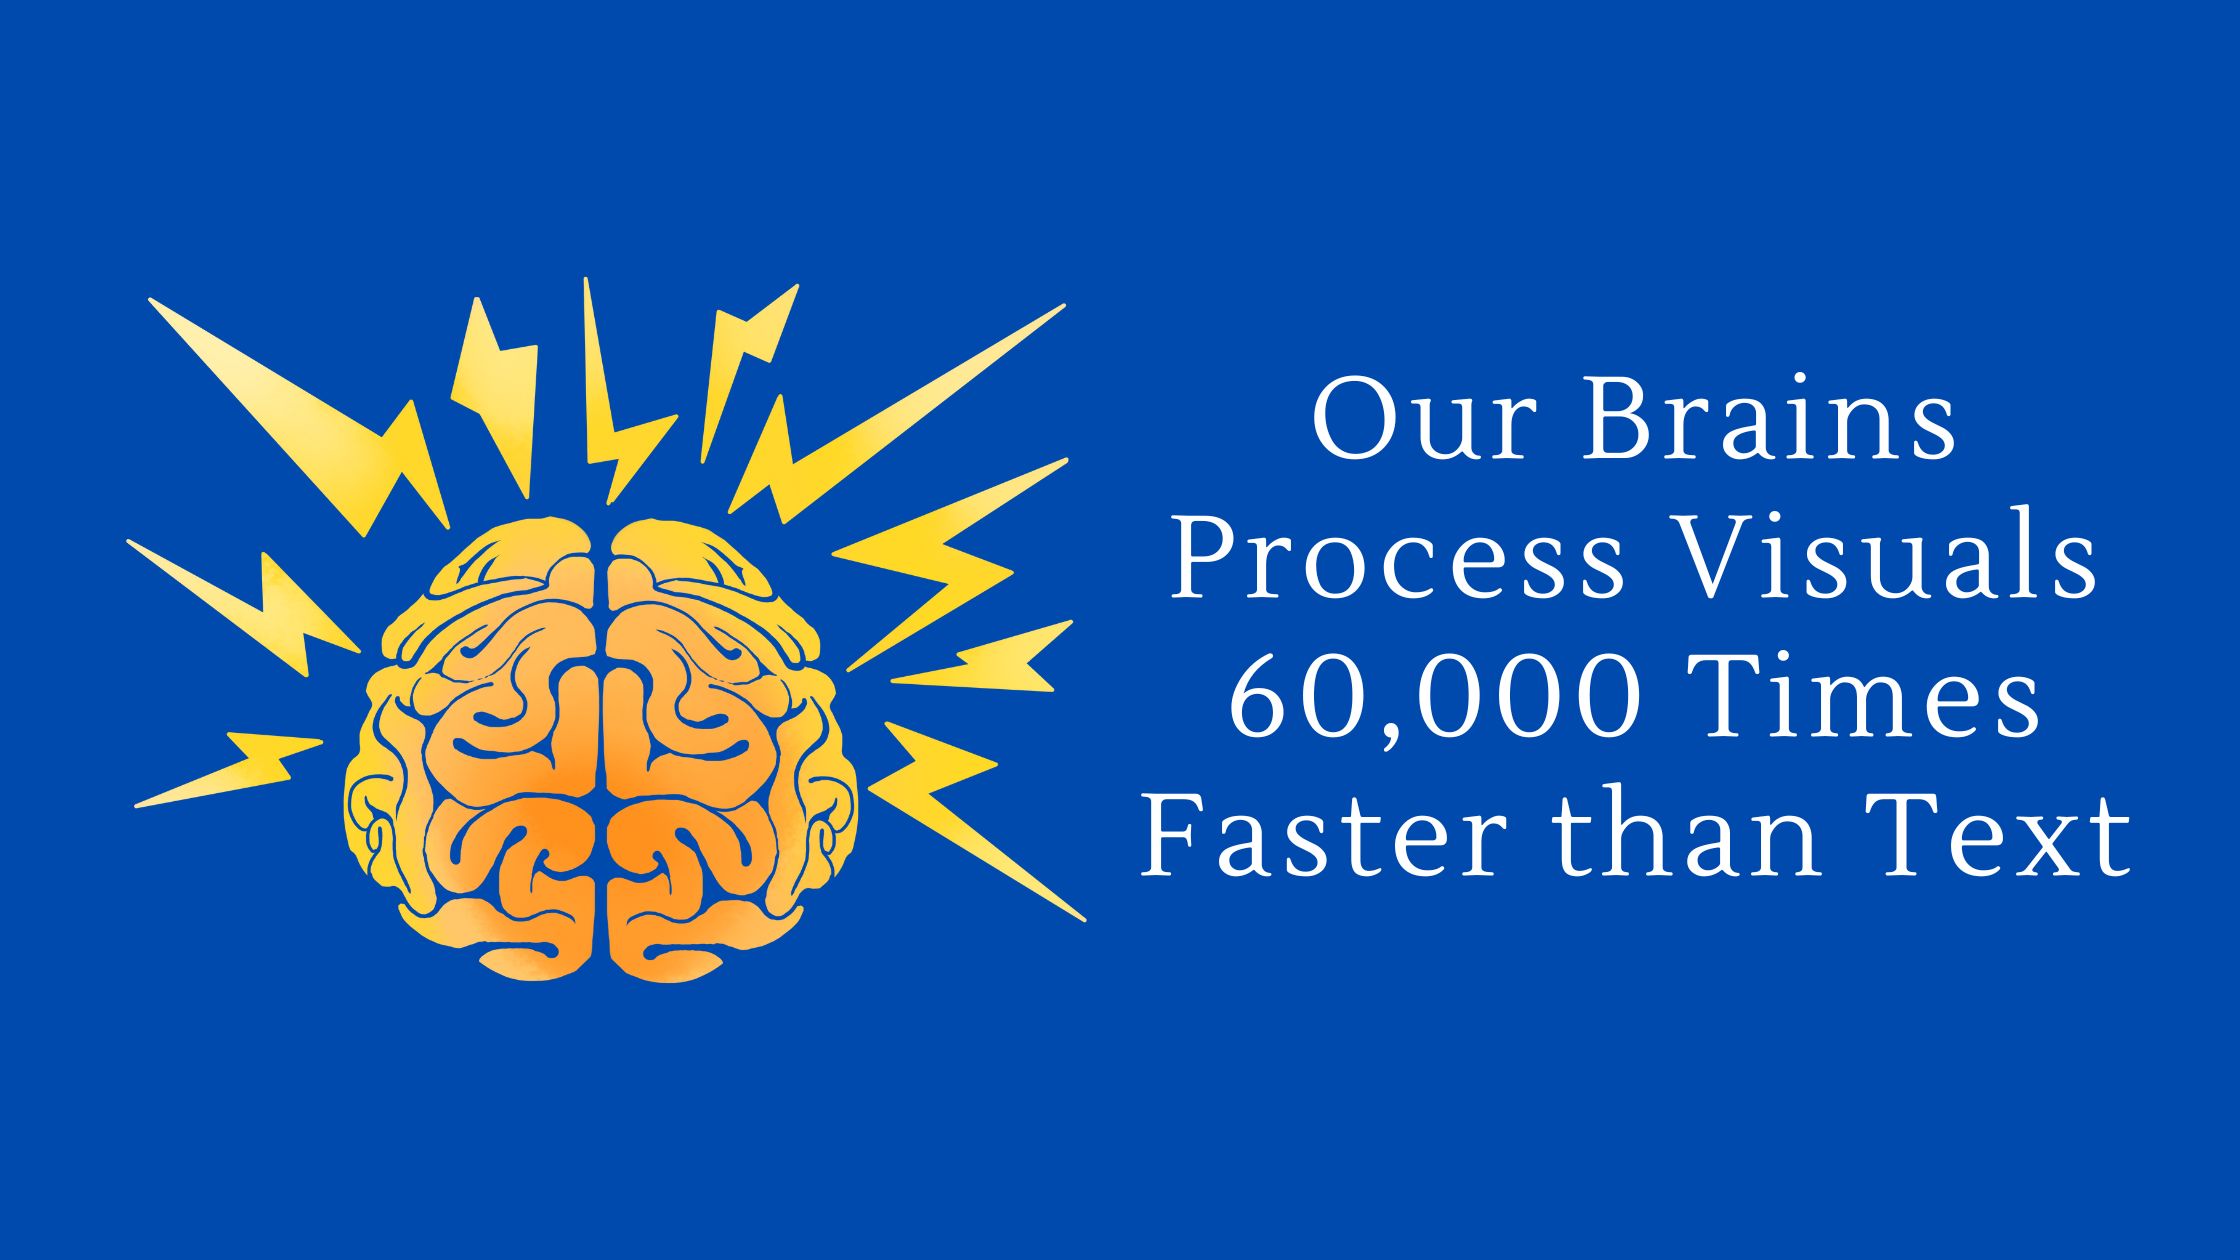 Our Brains Process Visuals 60,000 Times Faster than Text